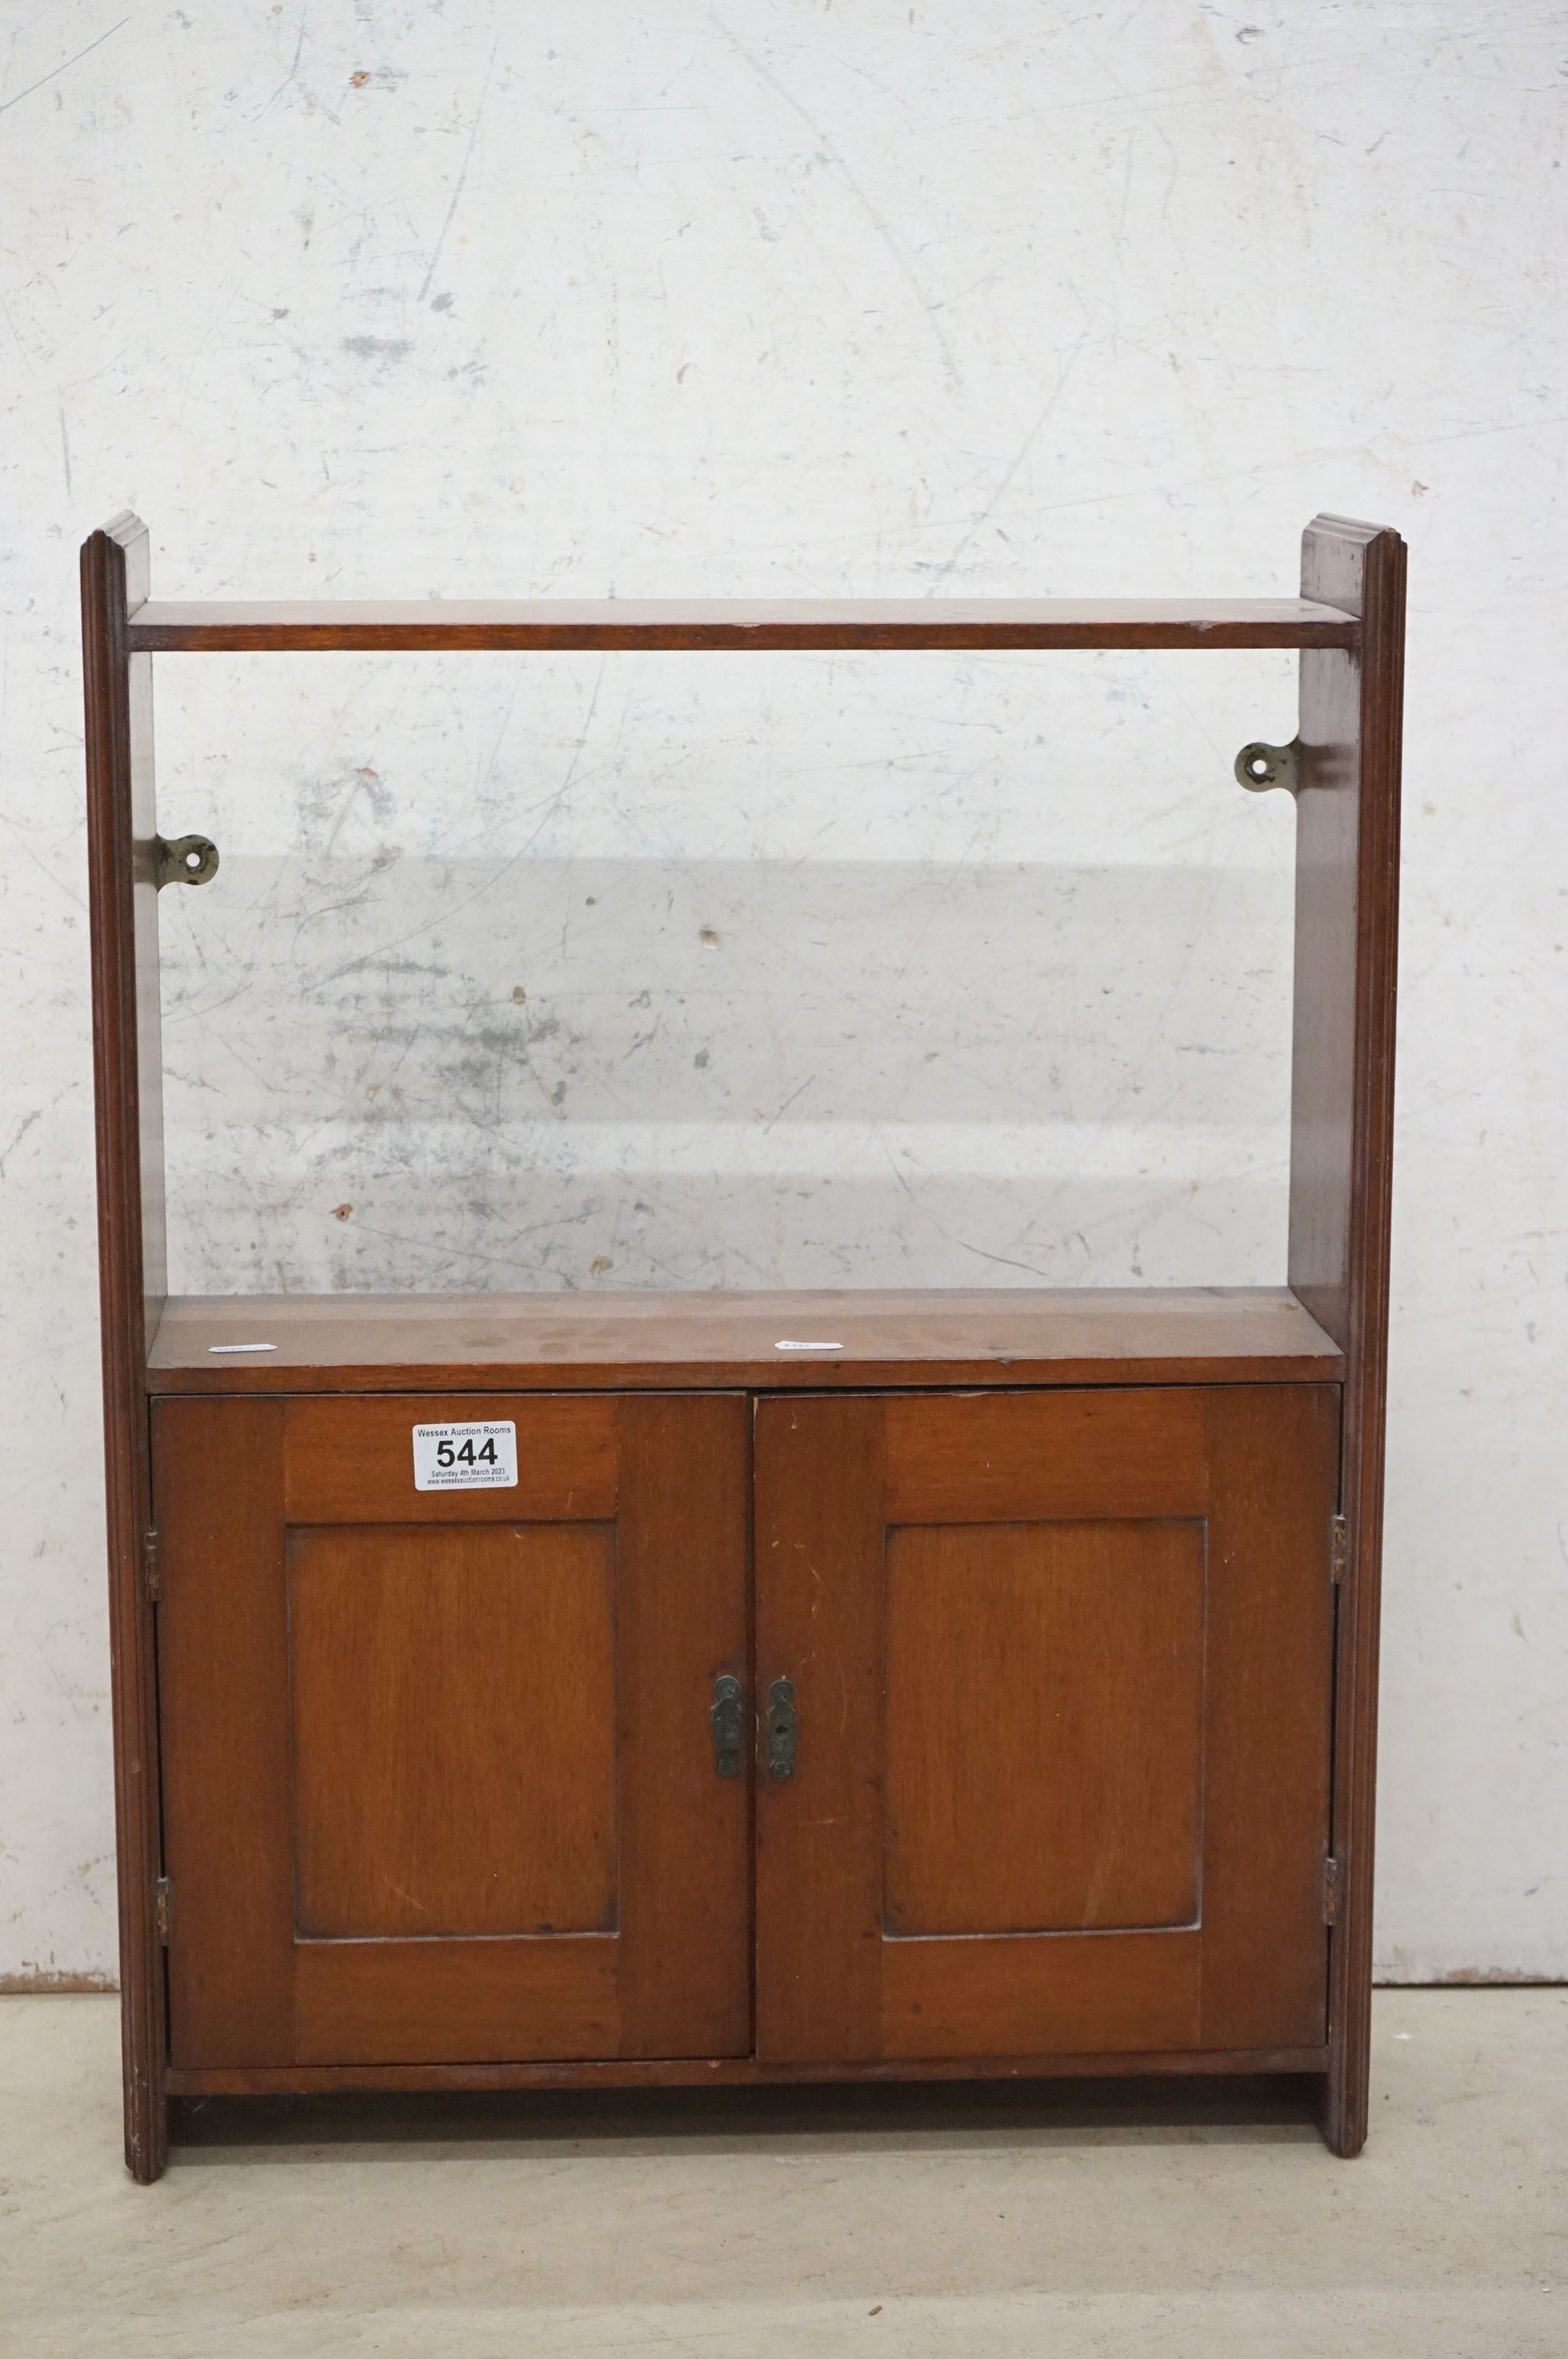 19th / Early 20th century Mahogany Hanging Wall Shelf and Cupboard, 48cm wide x 63cm high